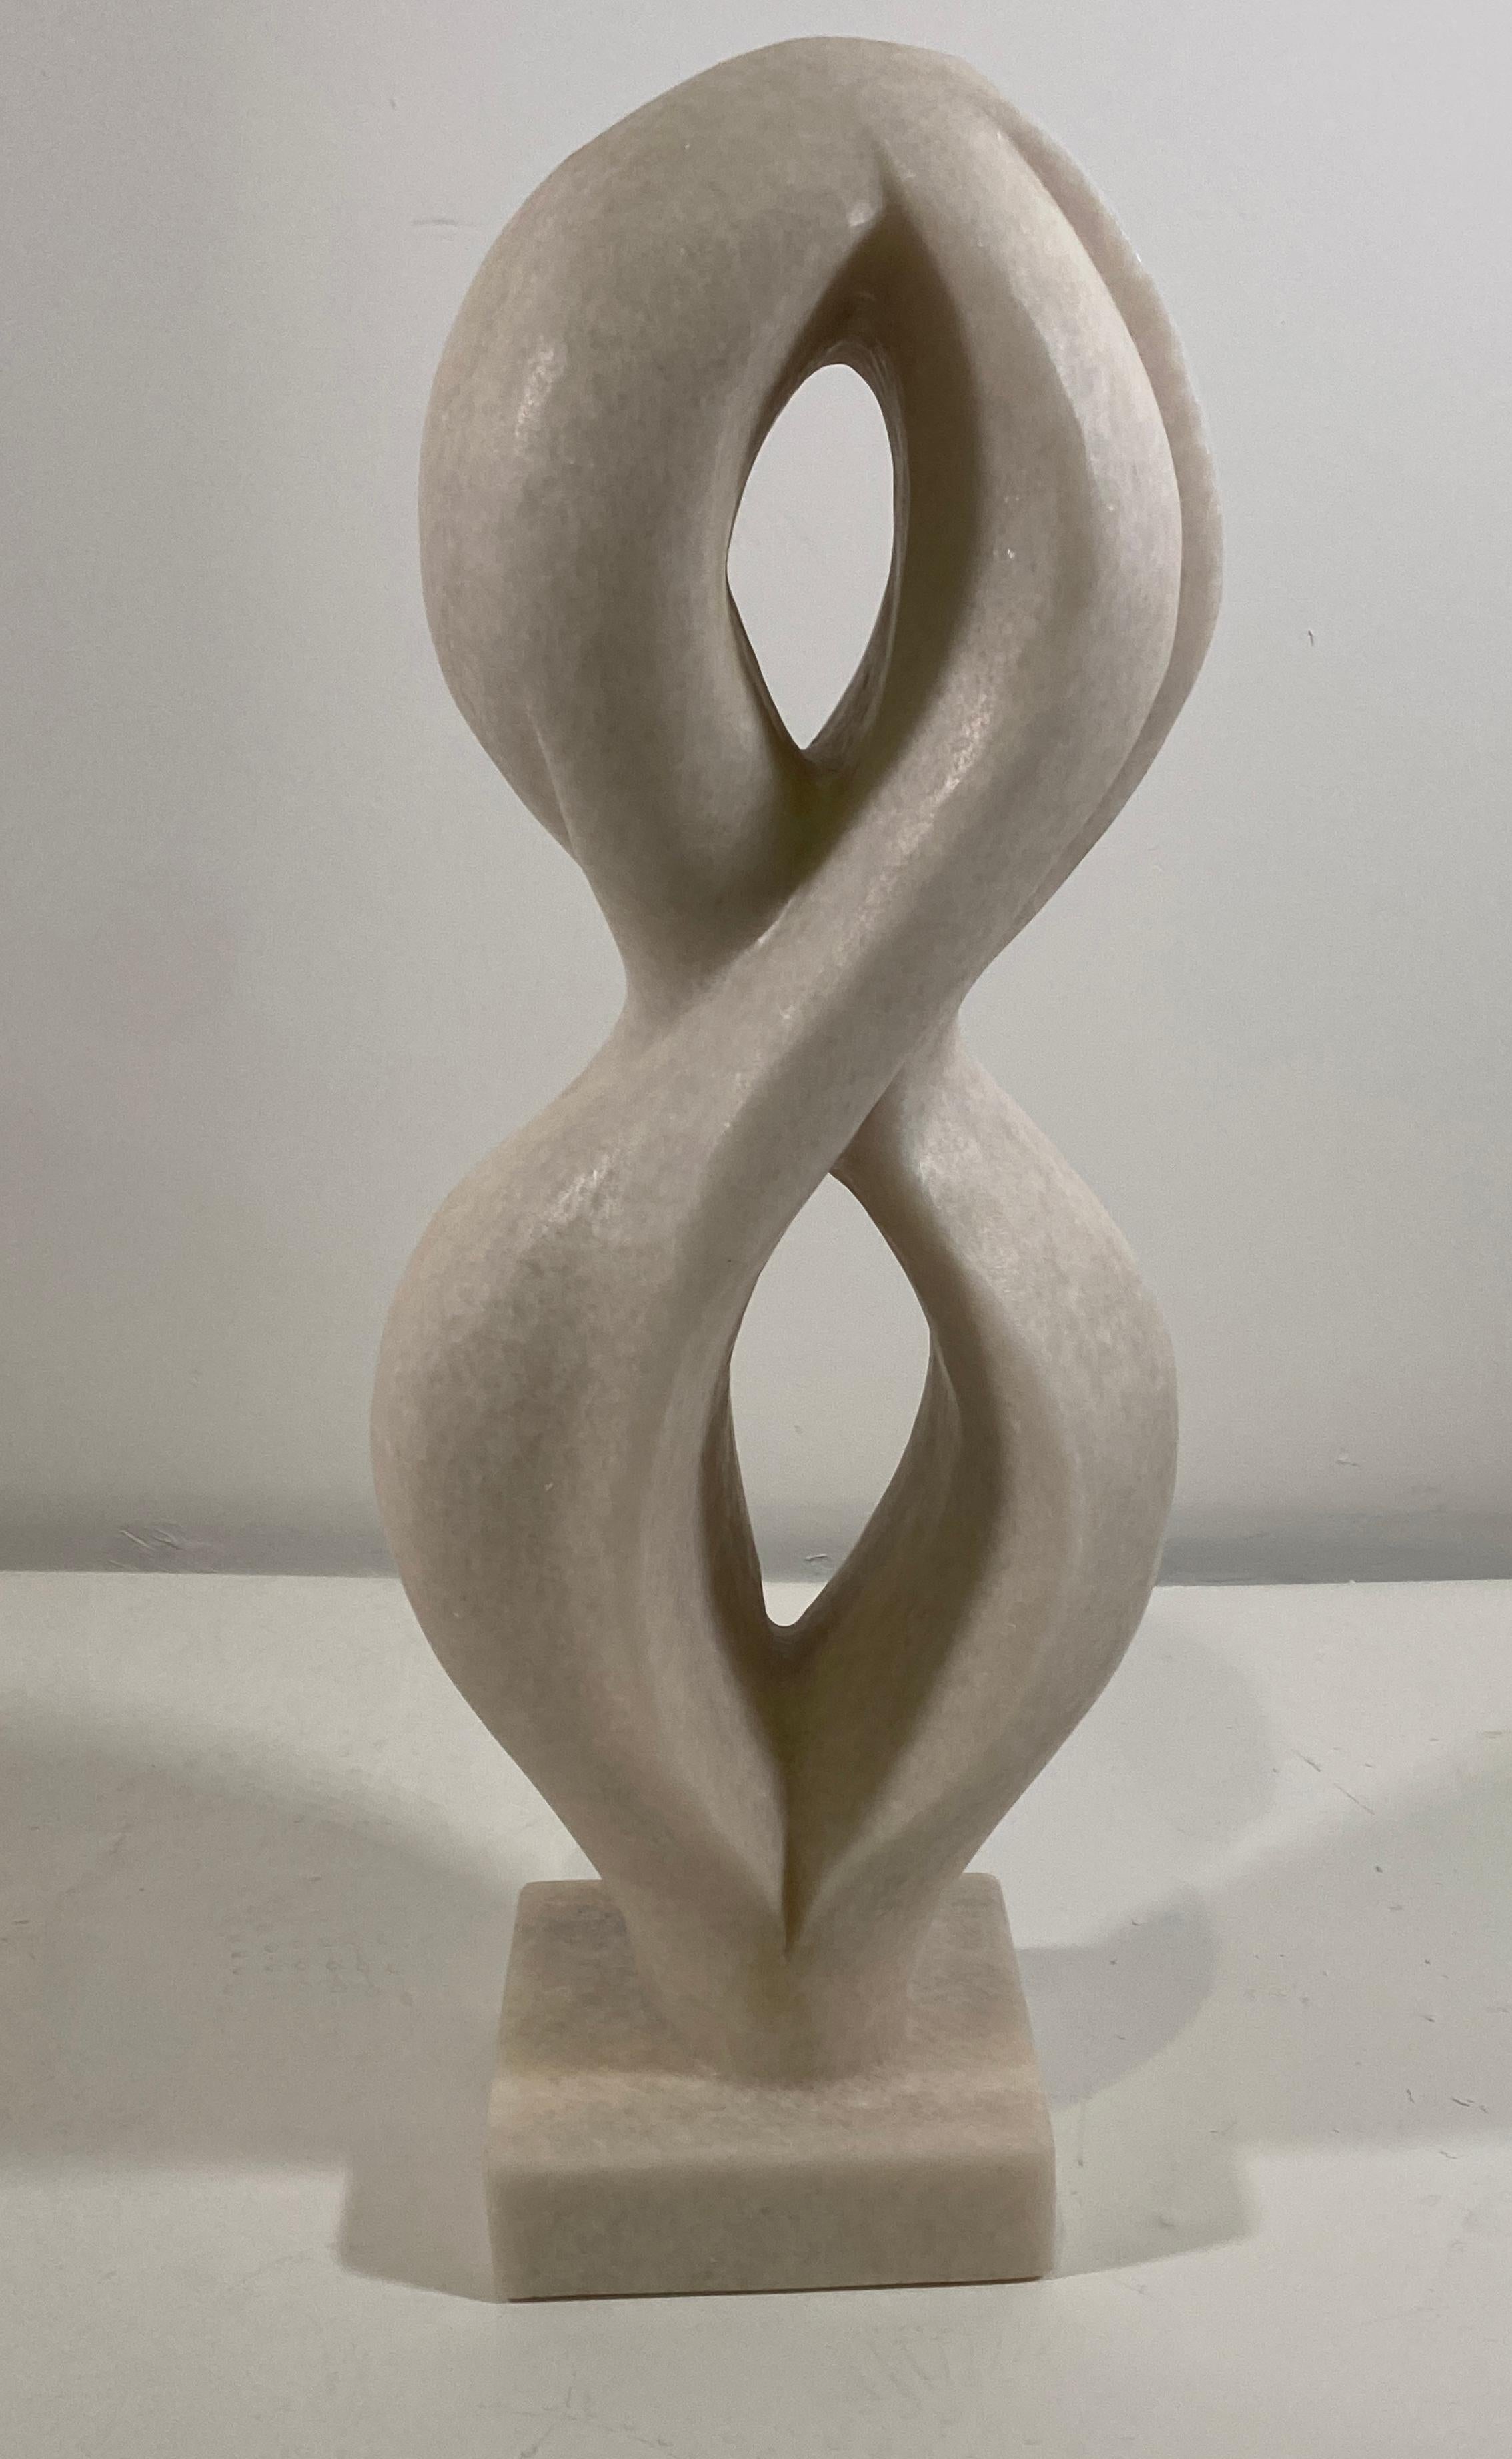 Joel, Swiss Modern white marble abstract sculpture, Evelyne Brader-Frank

Evelyne Brader-Frank was born in Wettingen, Switzerland in 1970 into an artistically talented family. Influenced by her grandfather, a landscape artist, and her brother, a